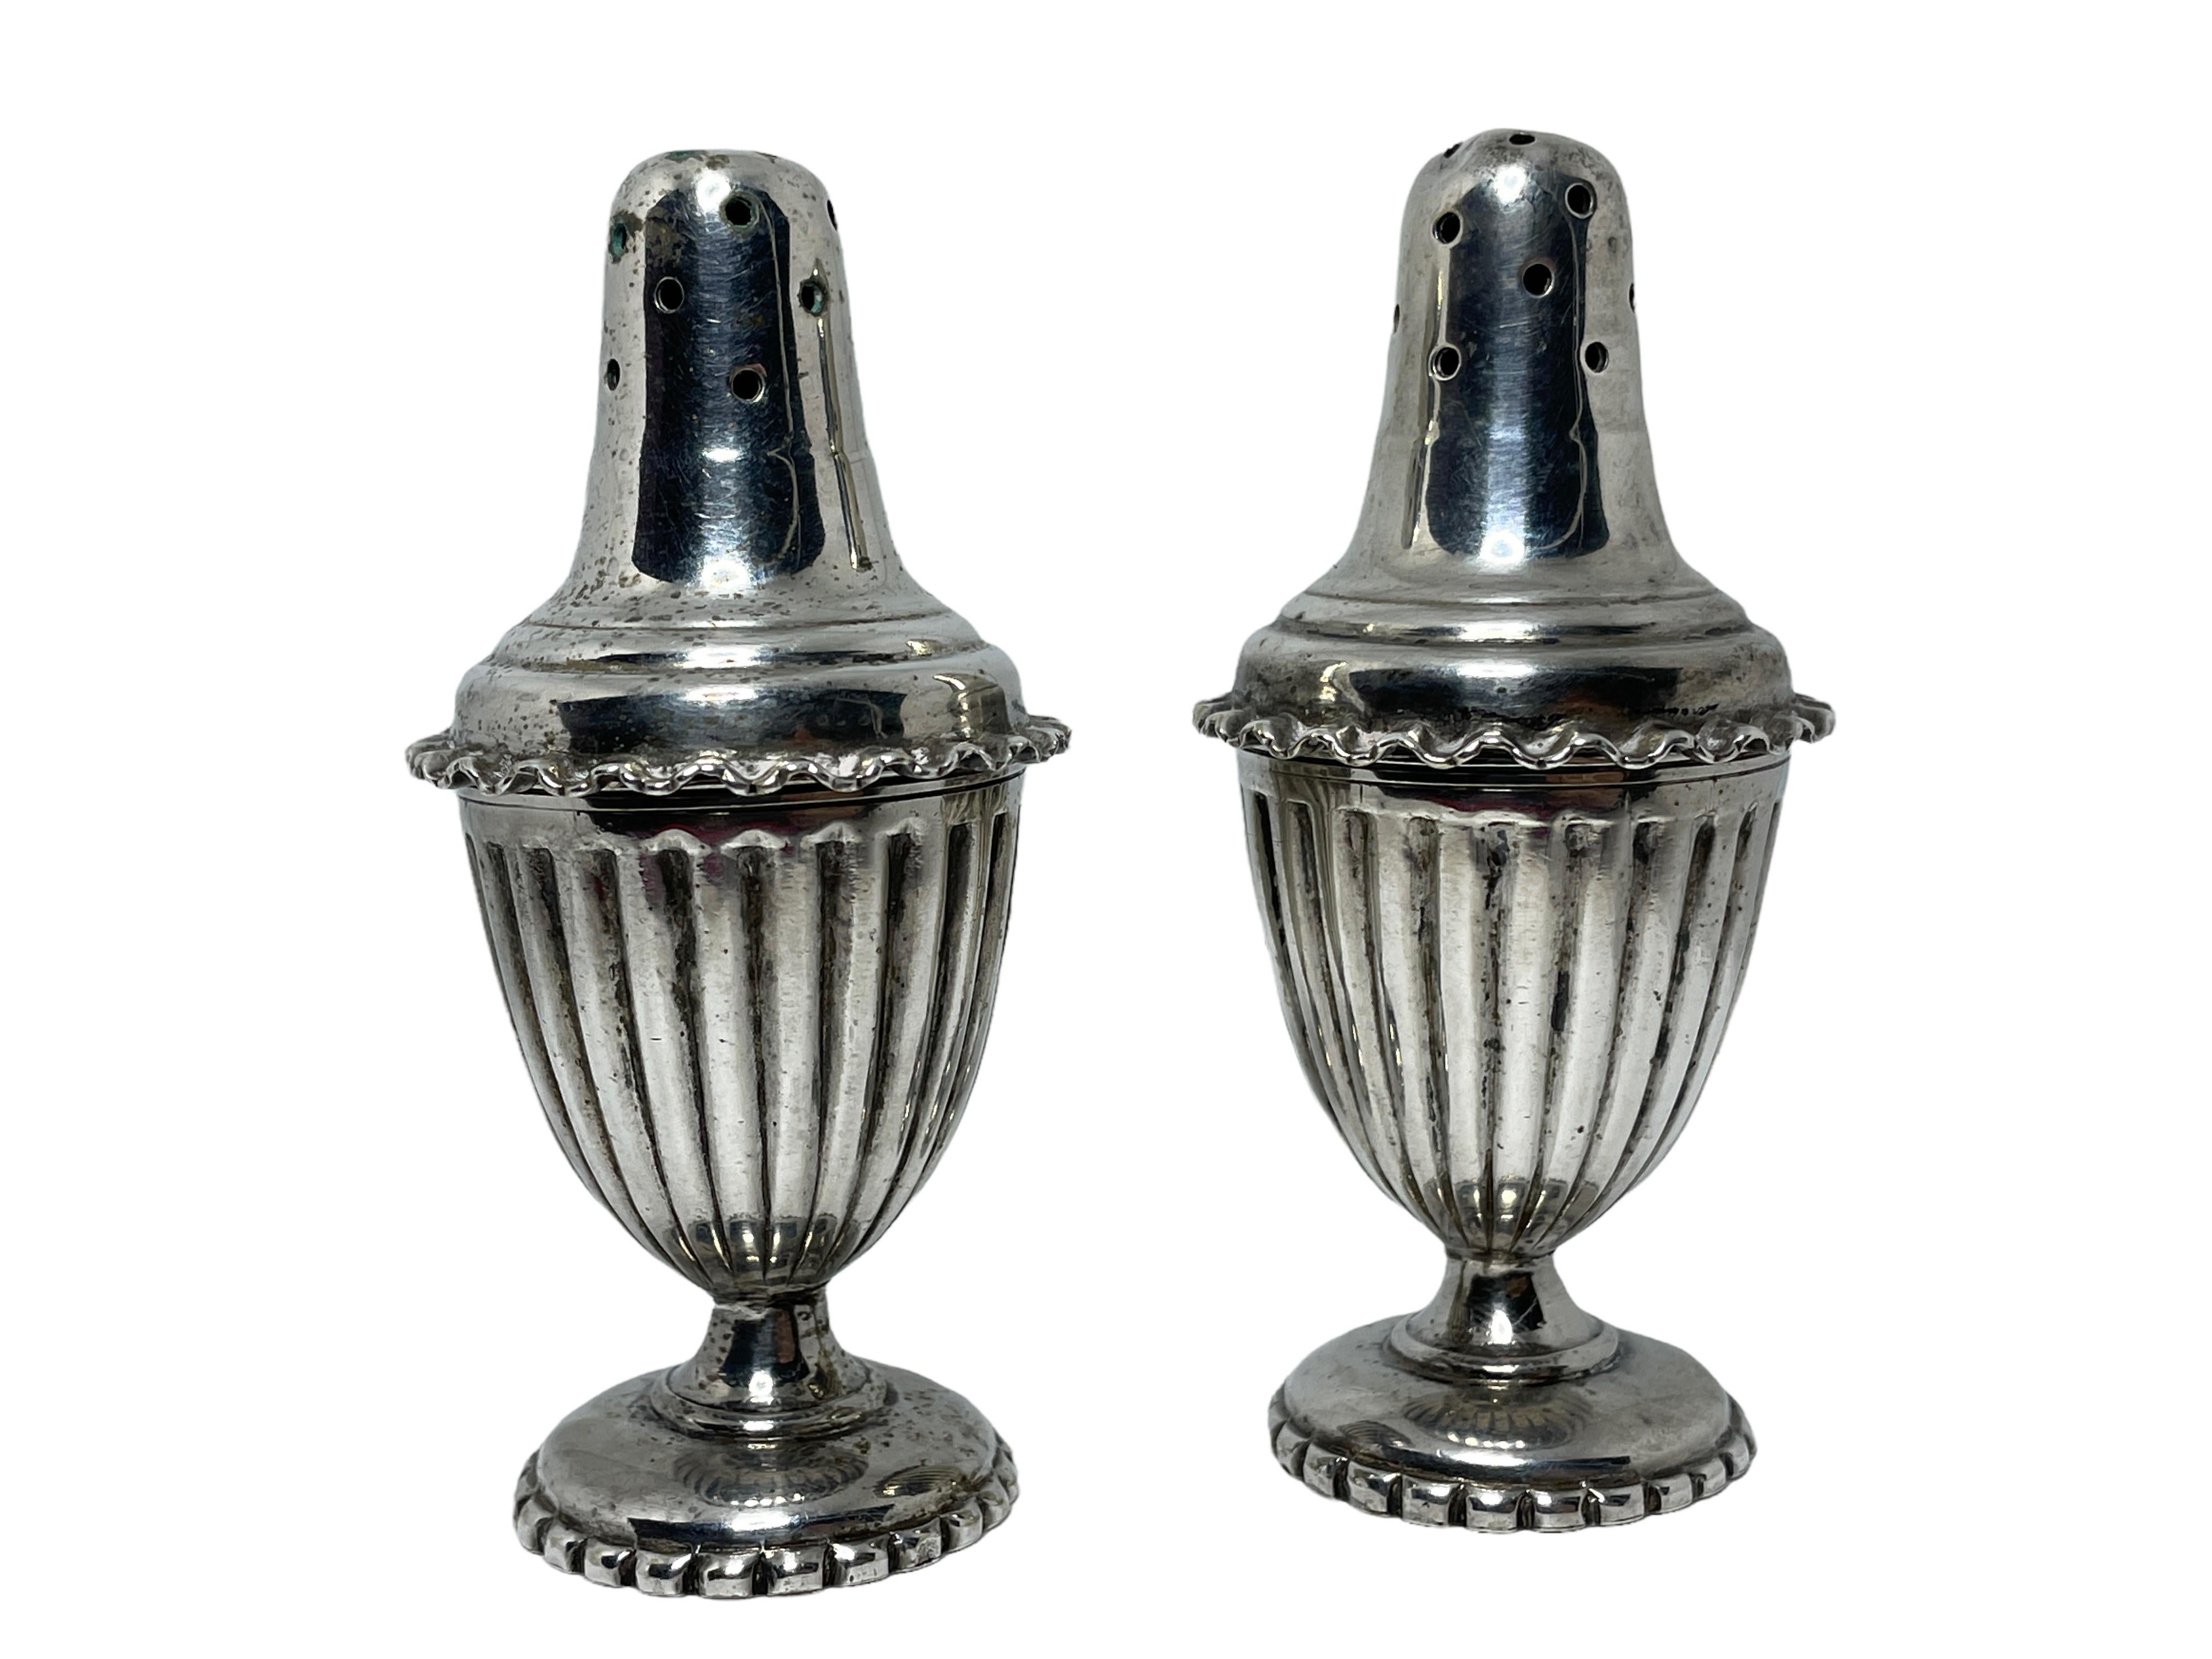 A beautiful silver plated pair of Salt & Pepper shaker, vintage Sweden. Nice addition to every table. Some patina, but this is old-age.
Found at an Estate sale in Stockholm, Sweden.

